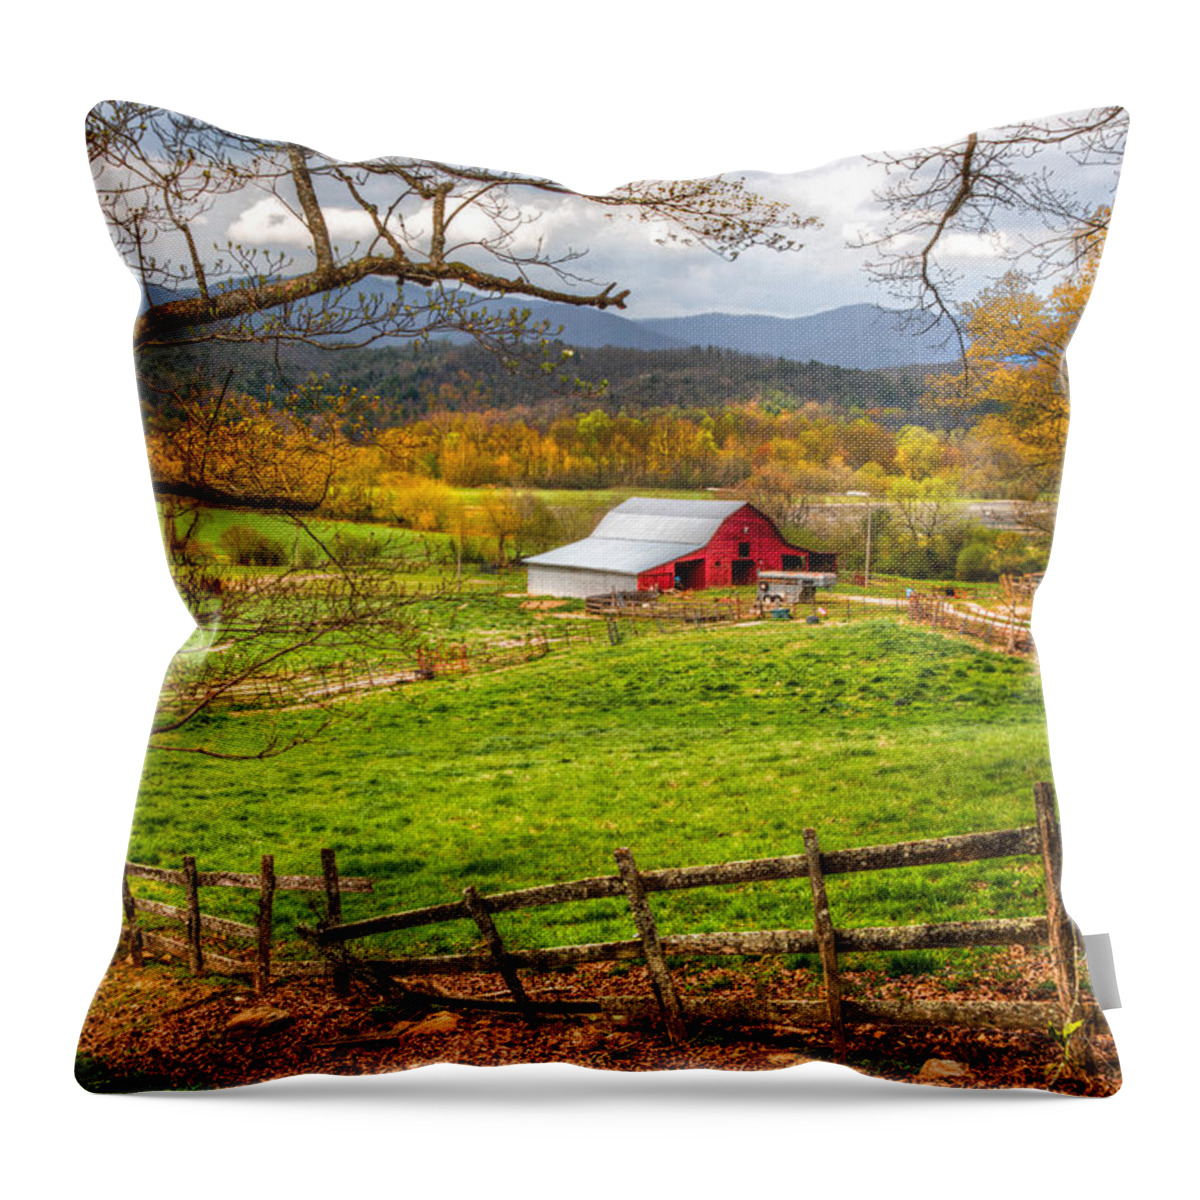 Andrews Throw Pillow featuring the photograph Red Barn by Debra and Dave Vanderlaan